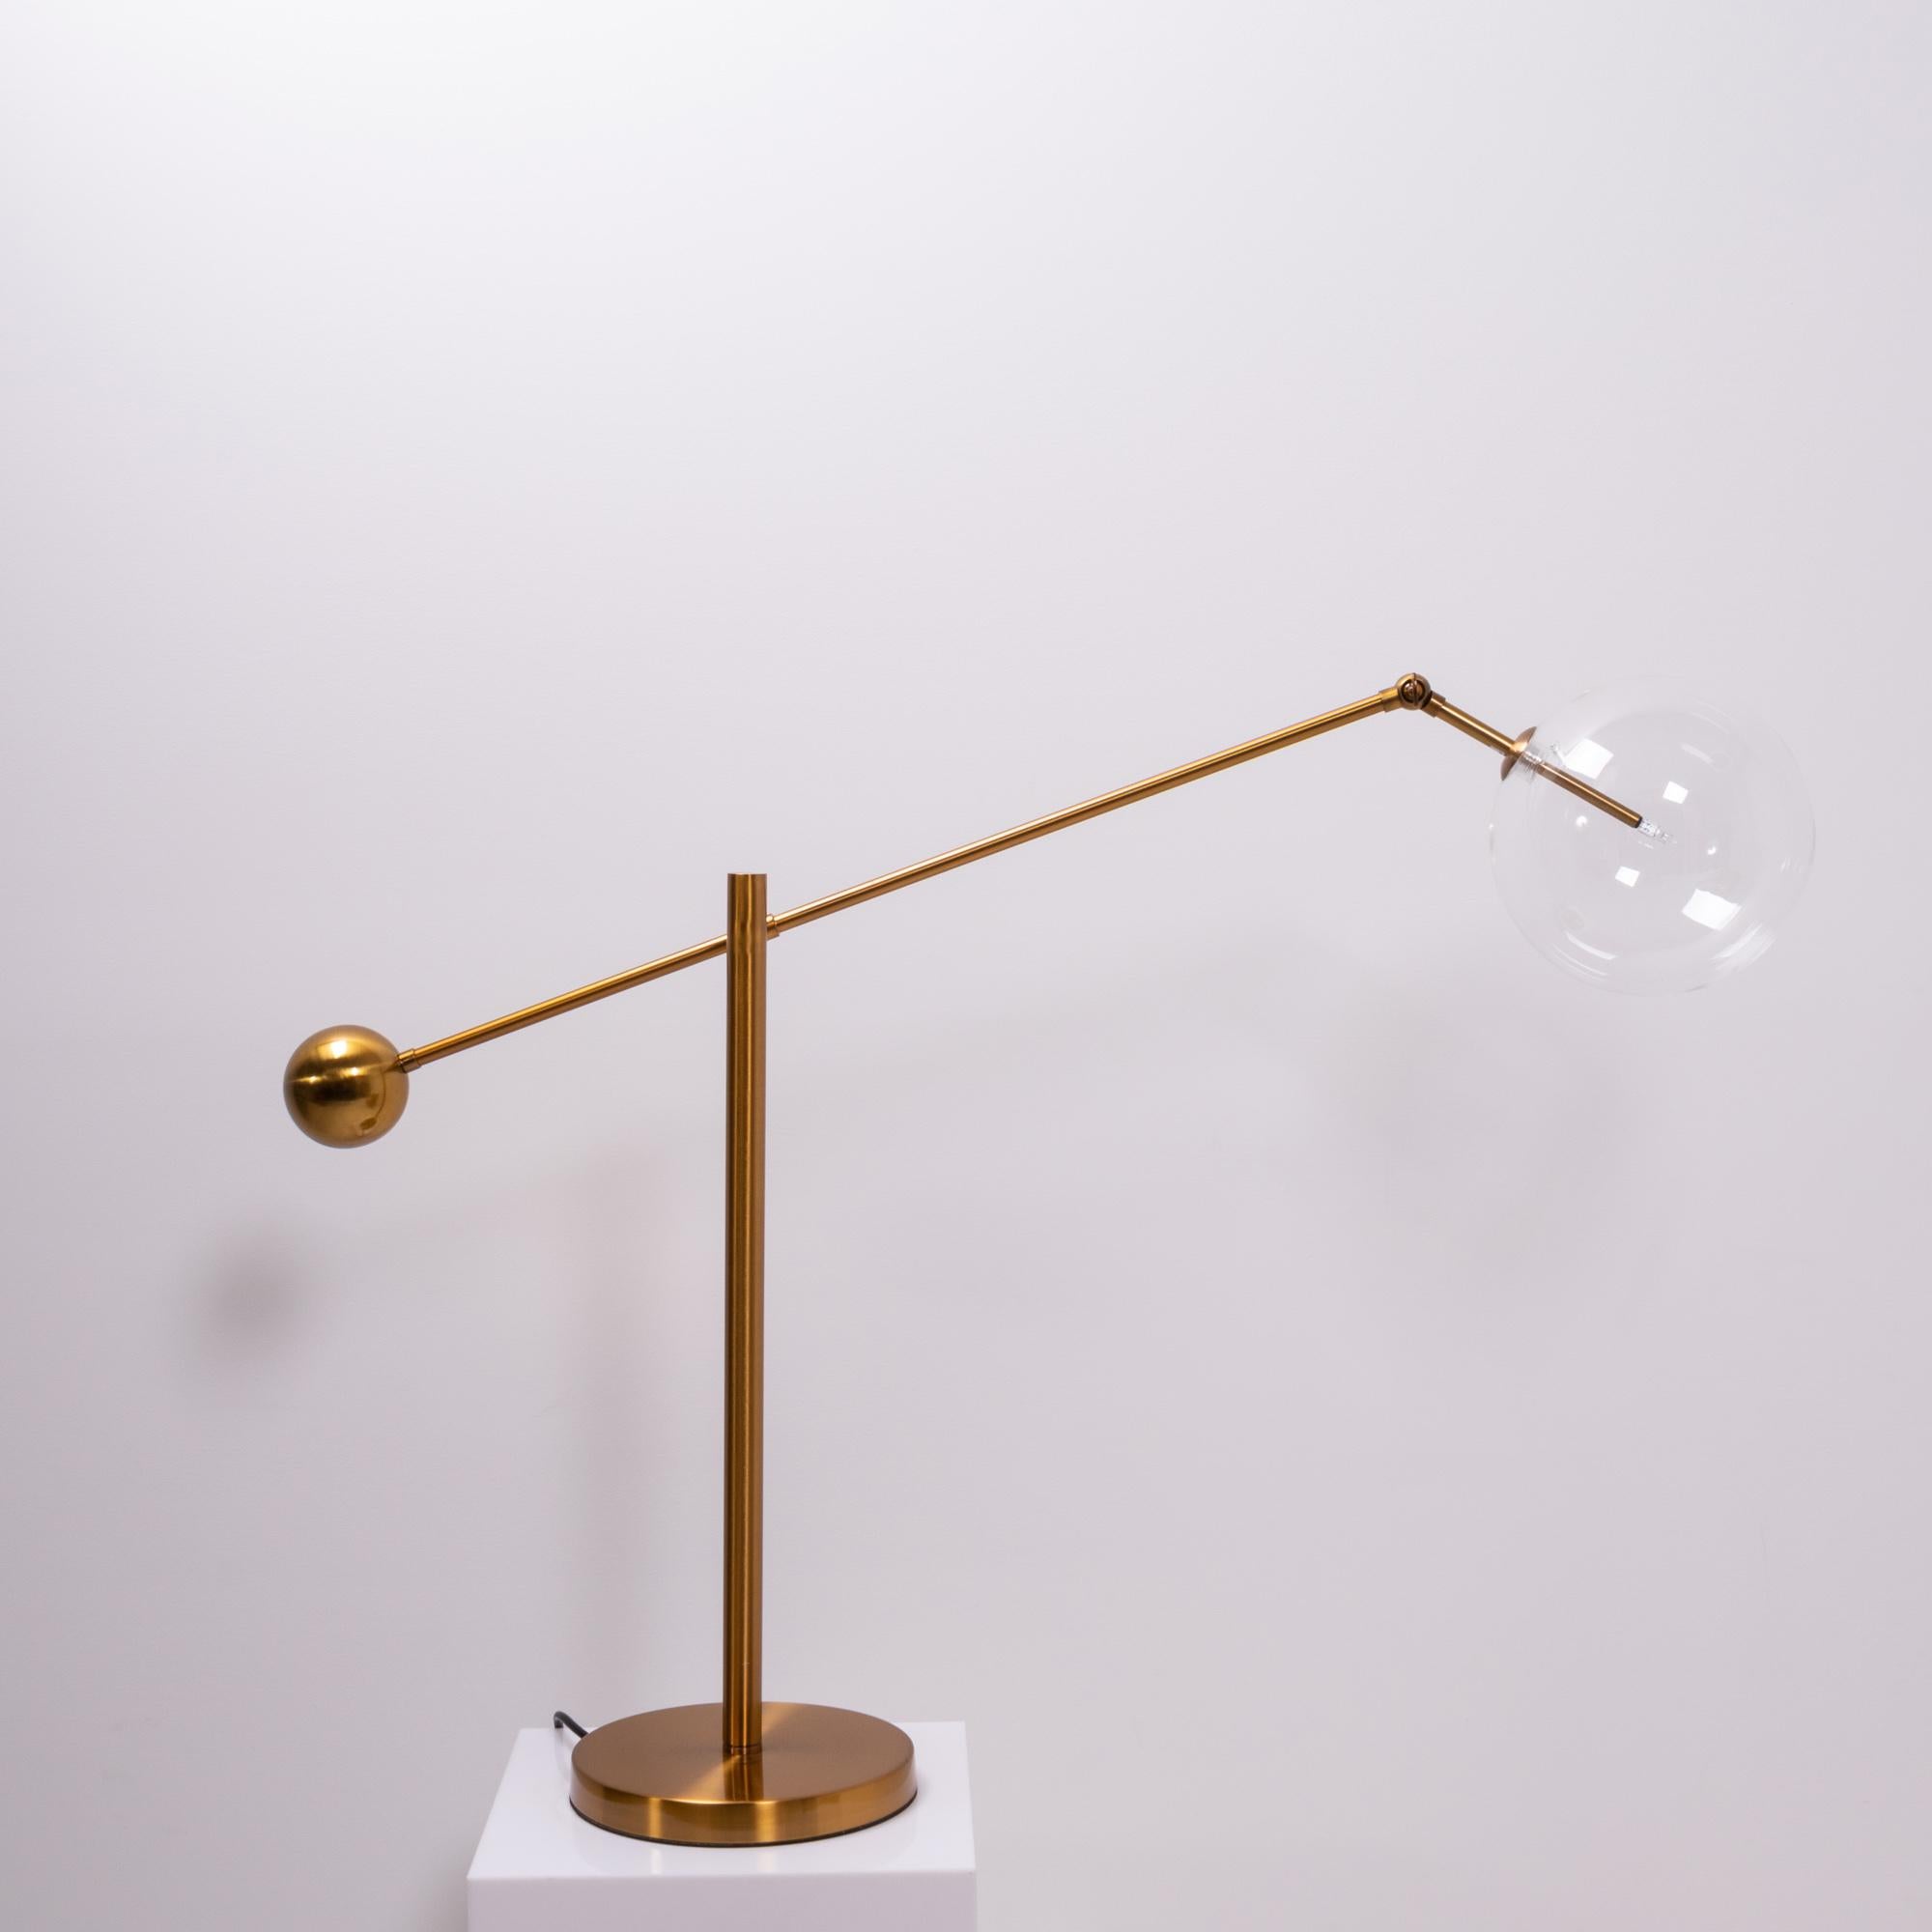 Inspired by Mid Century Italian design, this table lamp features a striking globe shade in clear glass.

Sitting on a round brass base, the arm cantilevers off of the stand and is weighted at the end with a brass sphere.

The lamp has a UK plug